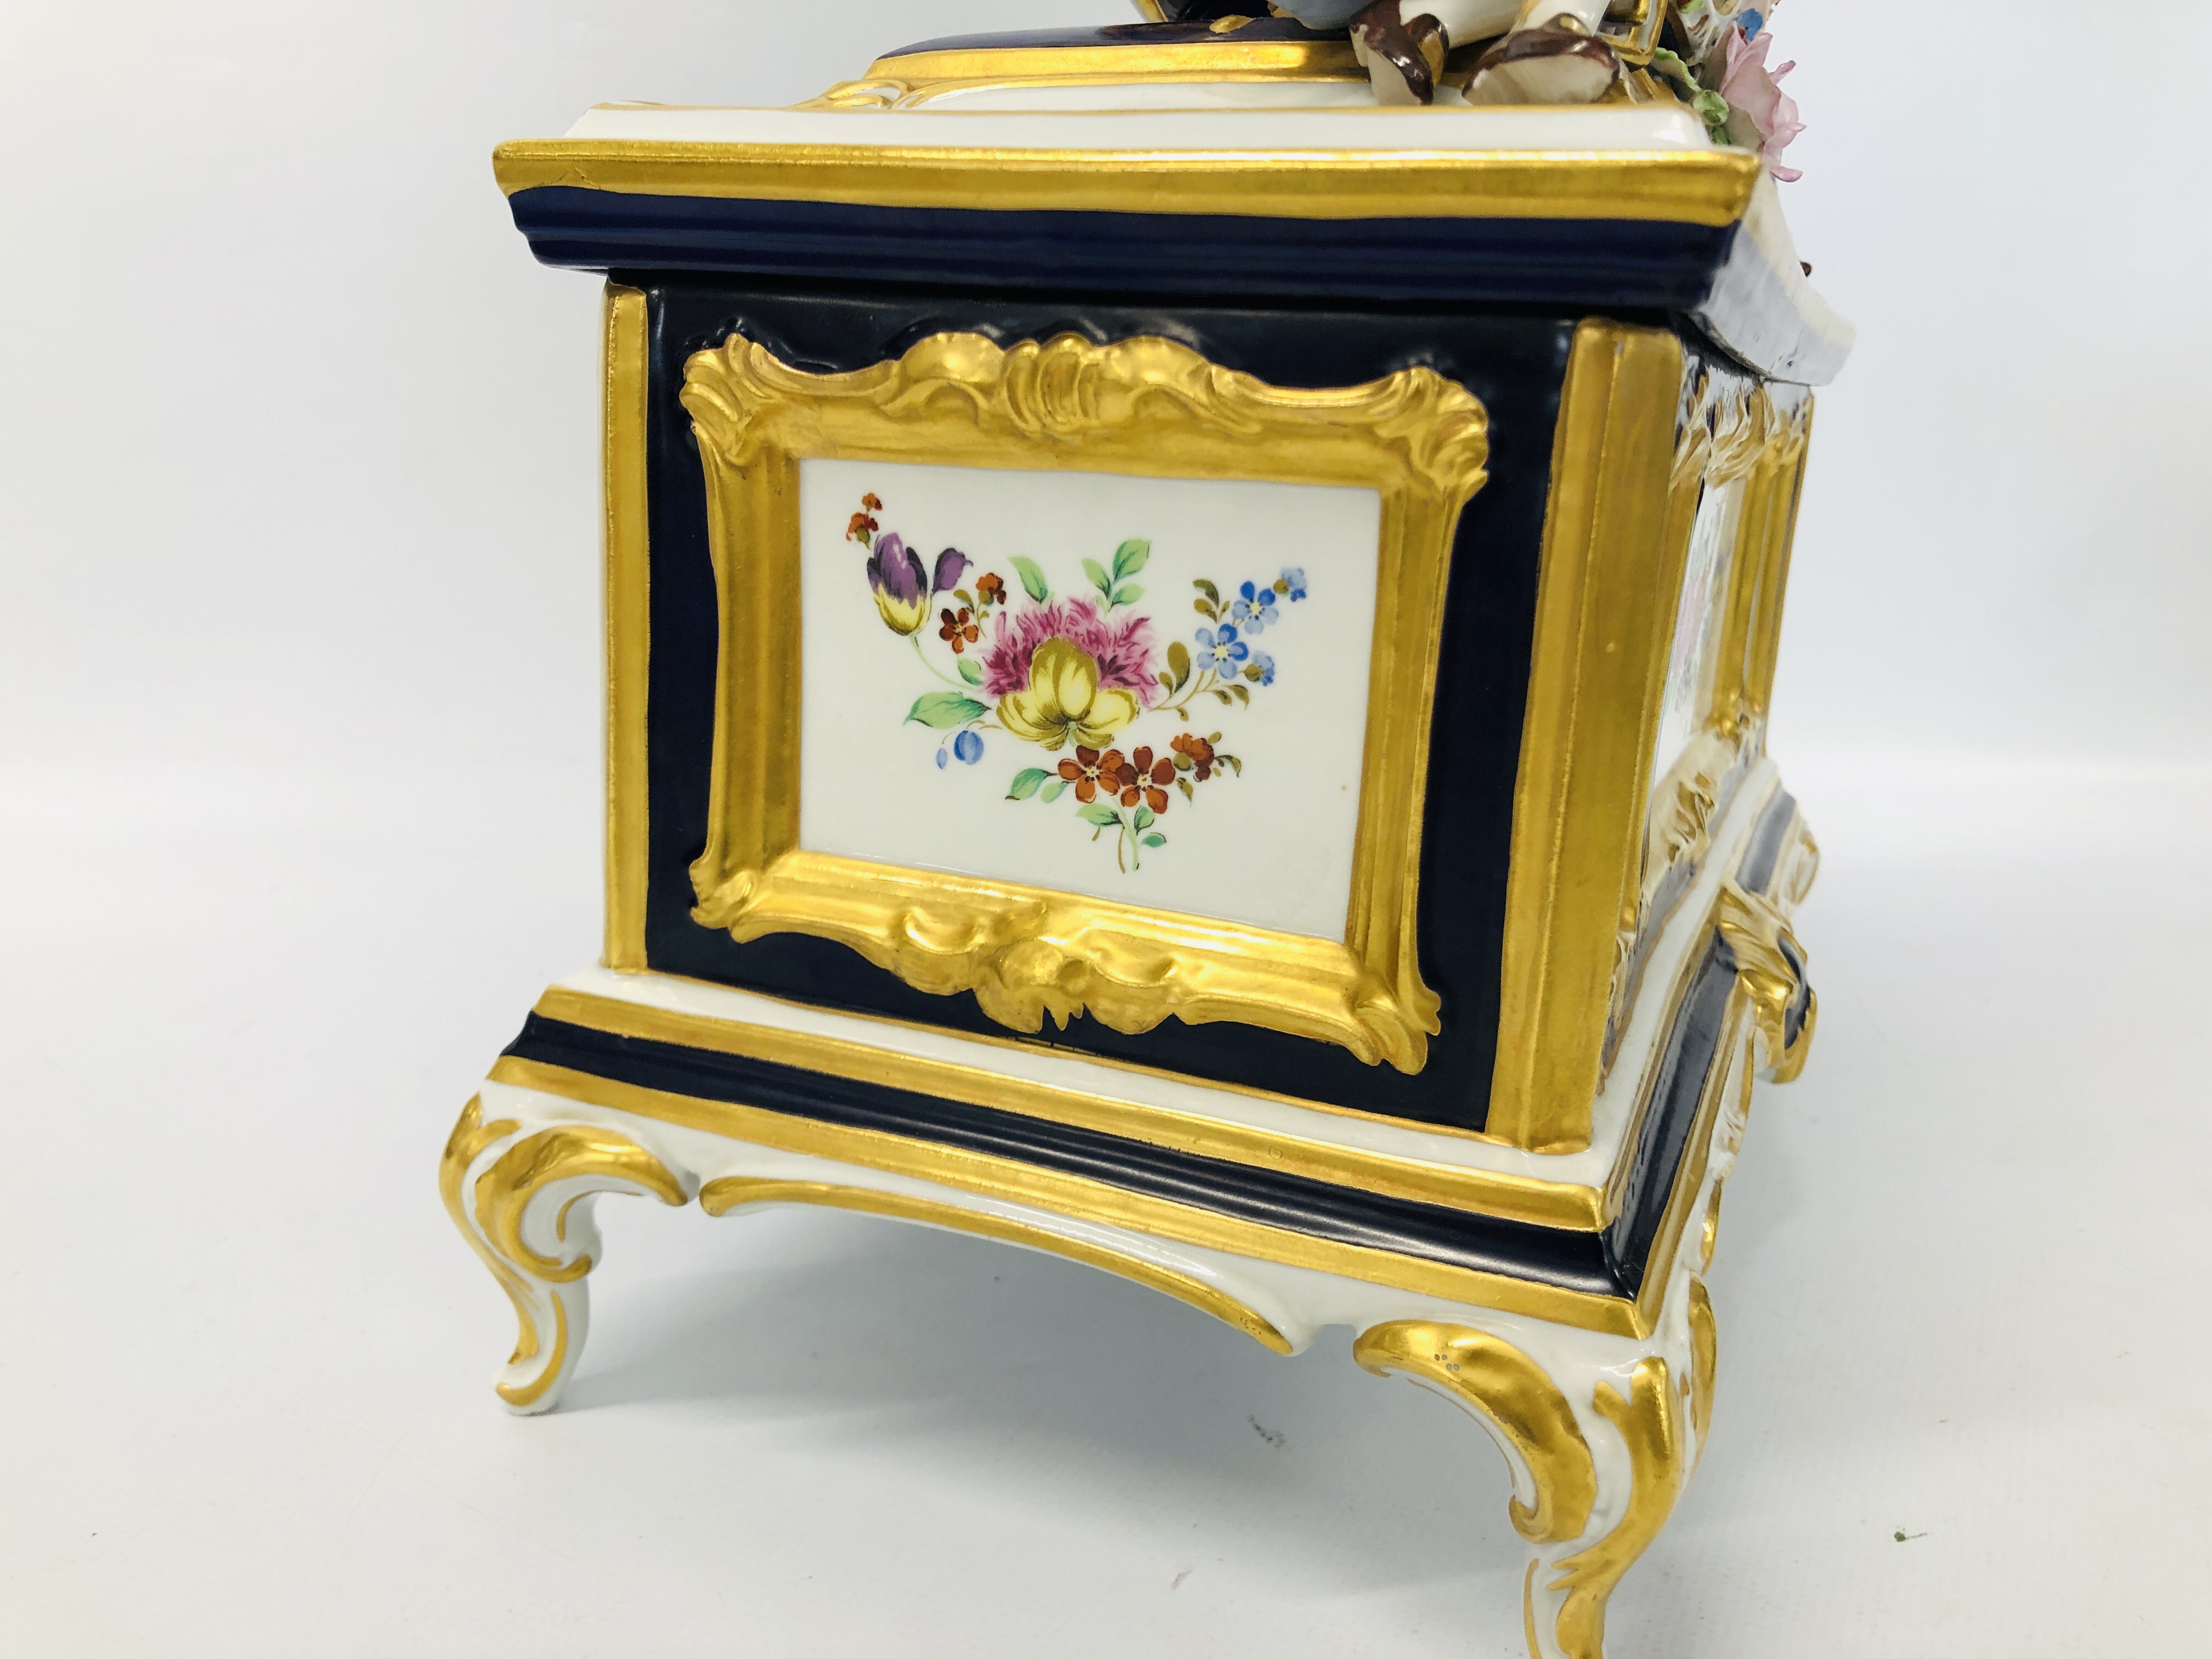 HIGHLY DECORATIVE MODERN PORCELAIN DRESDEN CLOCK ADORNED WITH BRIGHTLY COLOURED FLOWERS AND GILT - Image 6 of 12